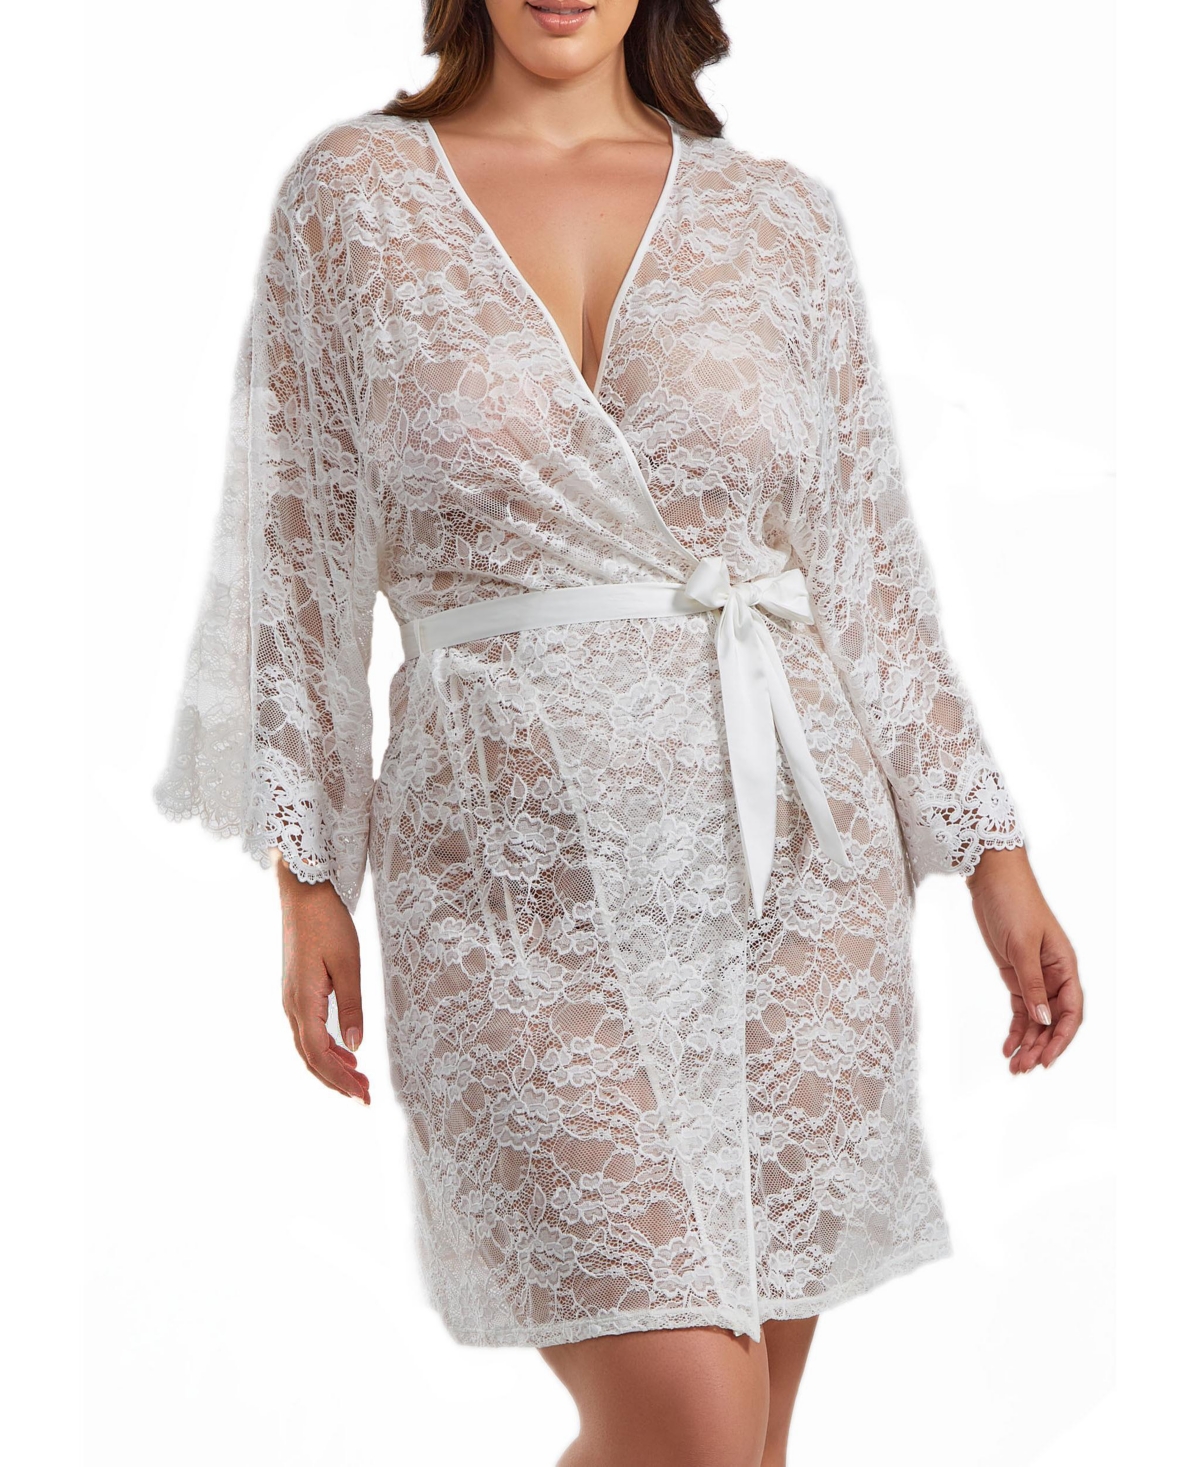 Icollection Jasmine Plus Size Soft Sheer Lace Robe With Self Tie Satin Sash In White